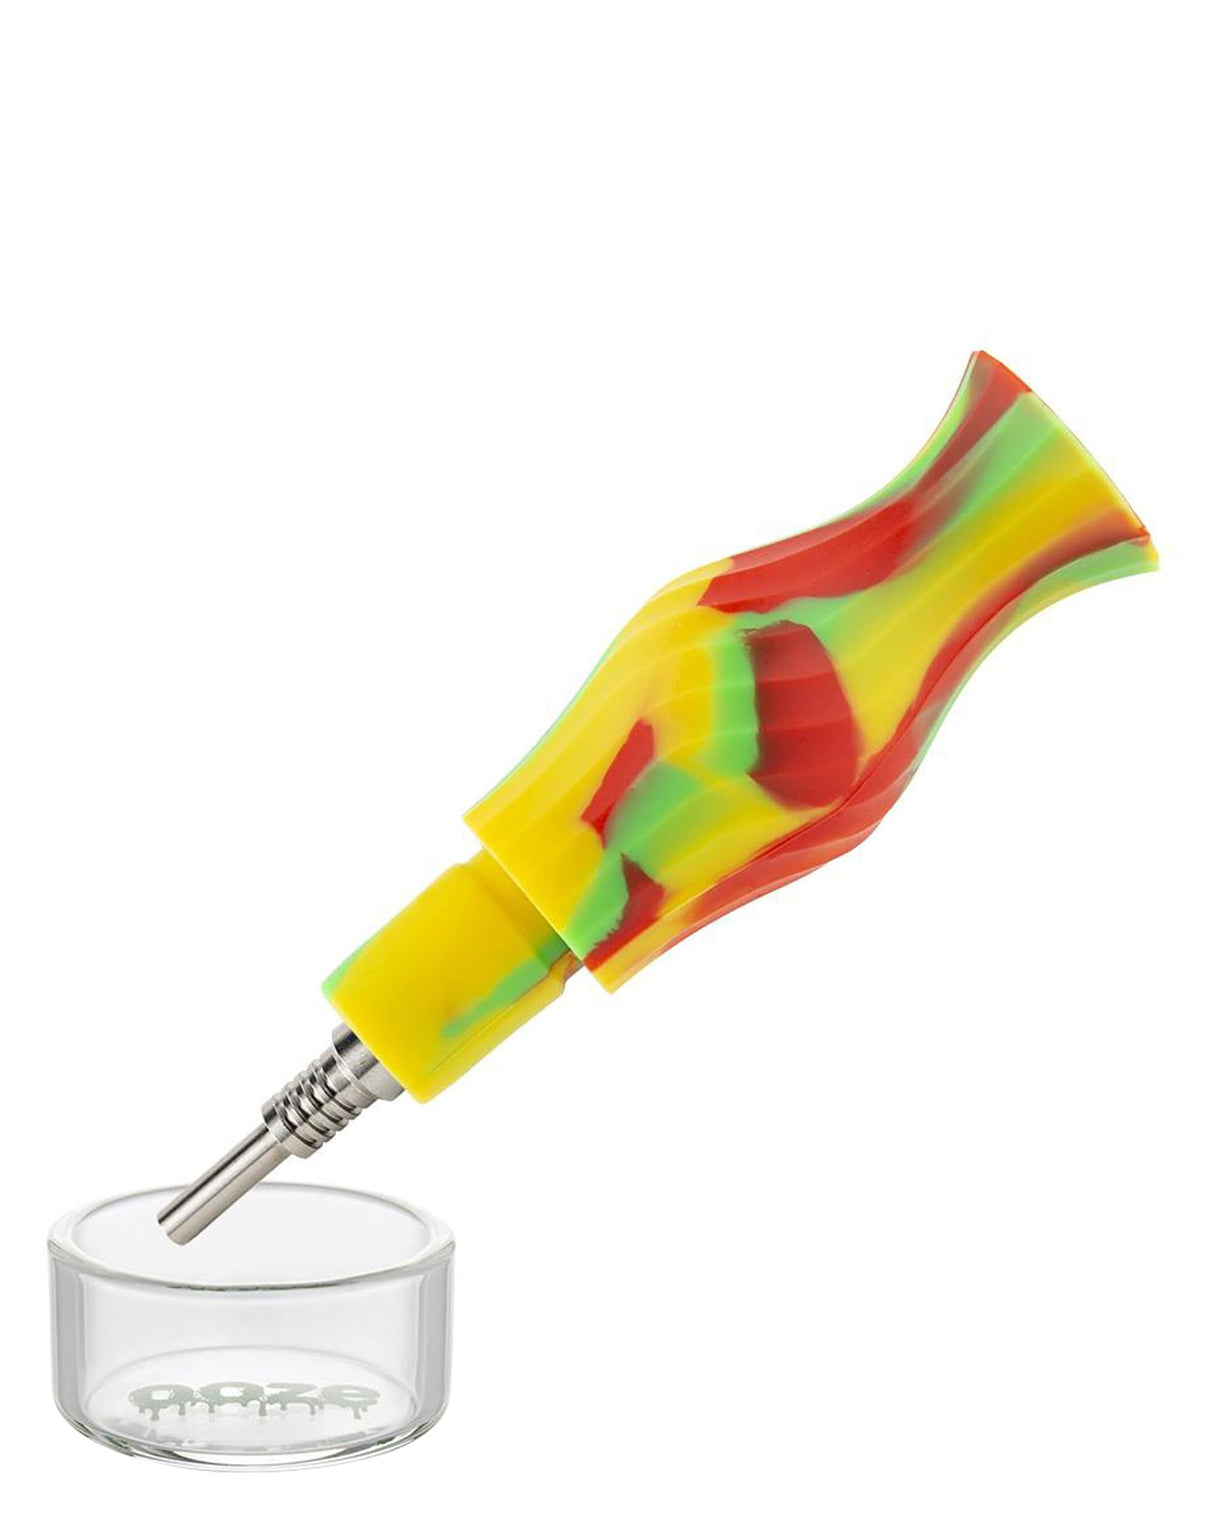 Ooze - Ozone Silicone Bong in vibrant red, yellow, and green colors, side view with quartz bowl